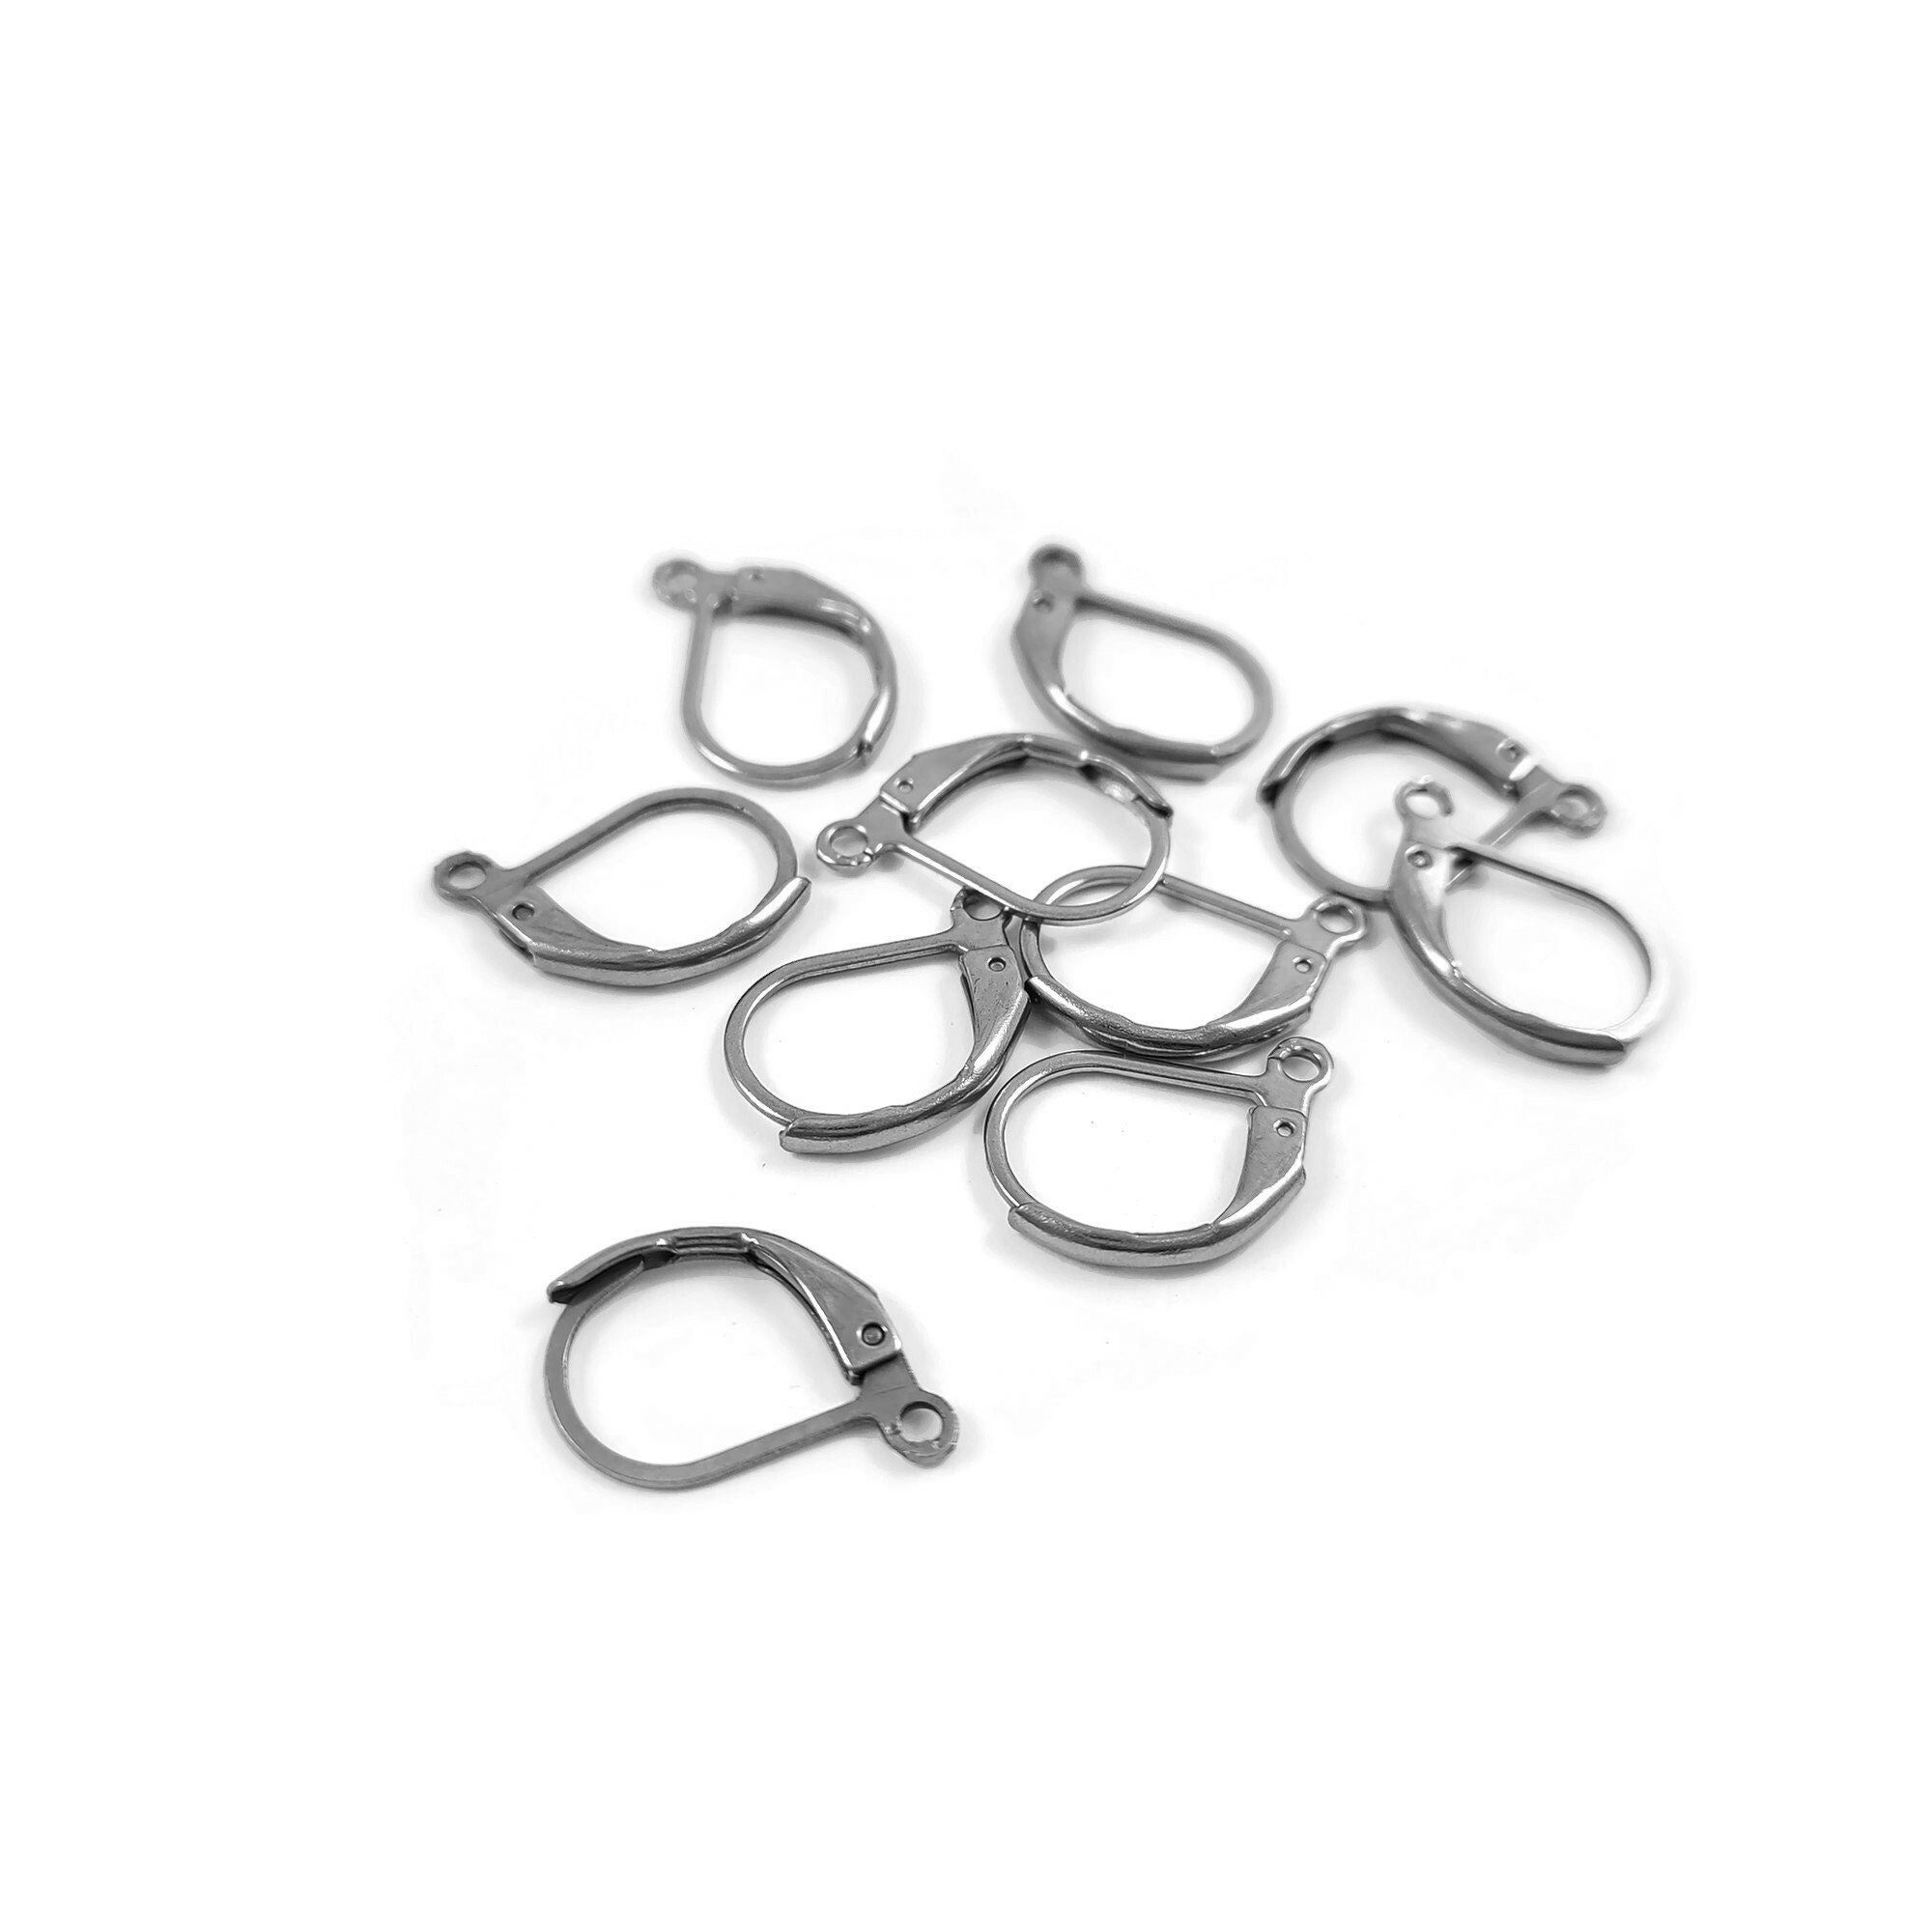 10x Stainless Steel Lever Back Earring Hooks, High Quality Hypoallergenic  Silver Tone French Earring Locking Wire Hooks W/open Loop F300 